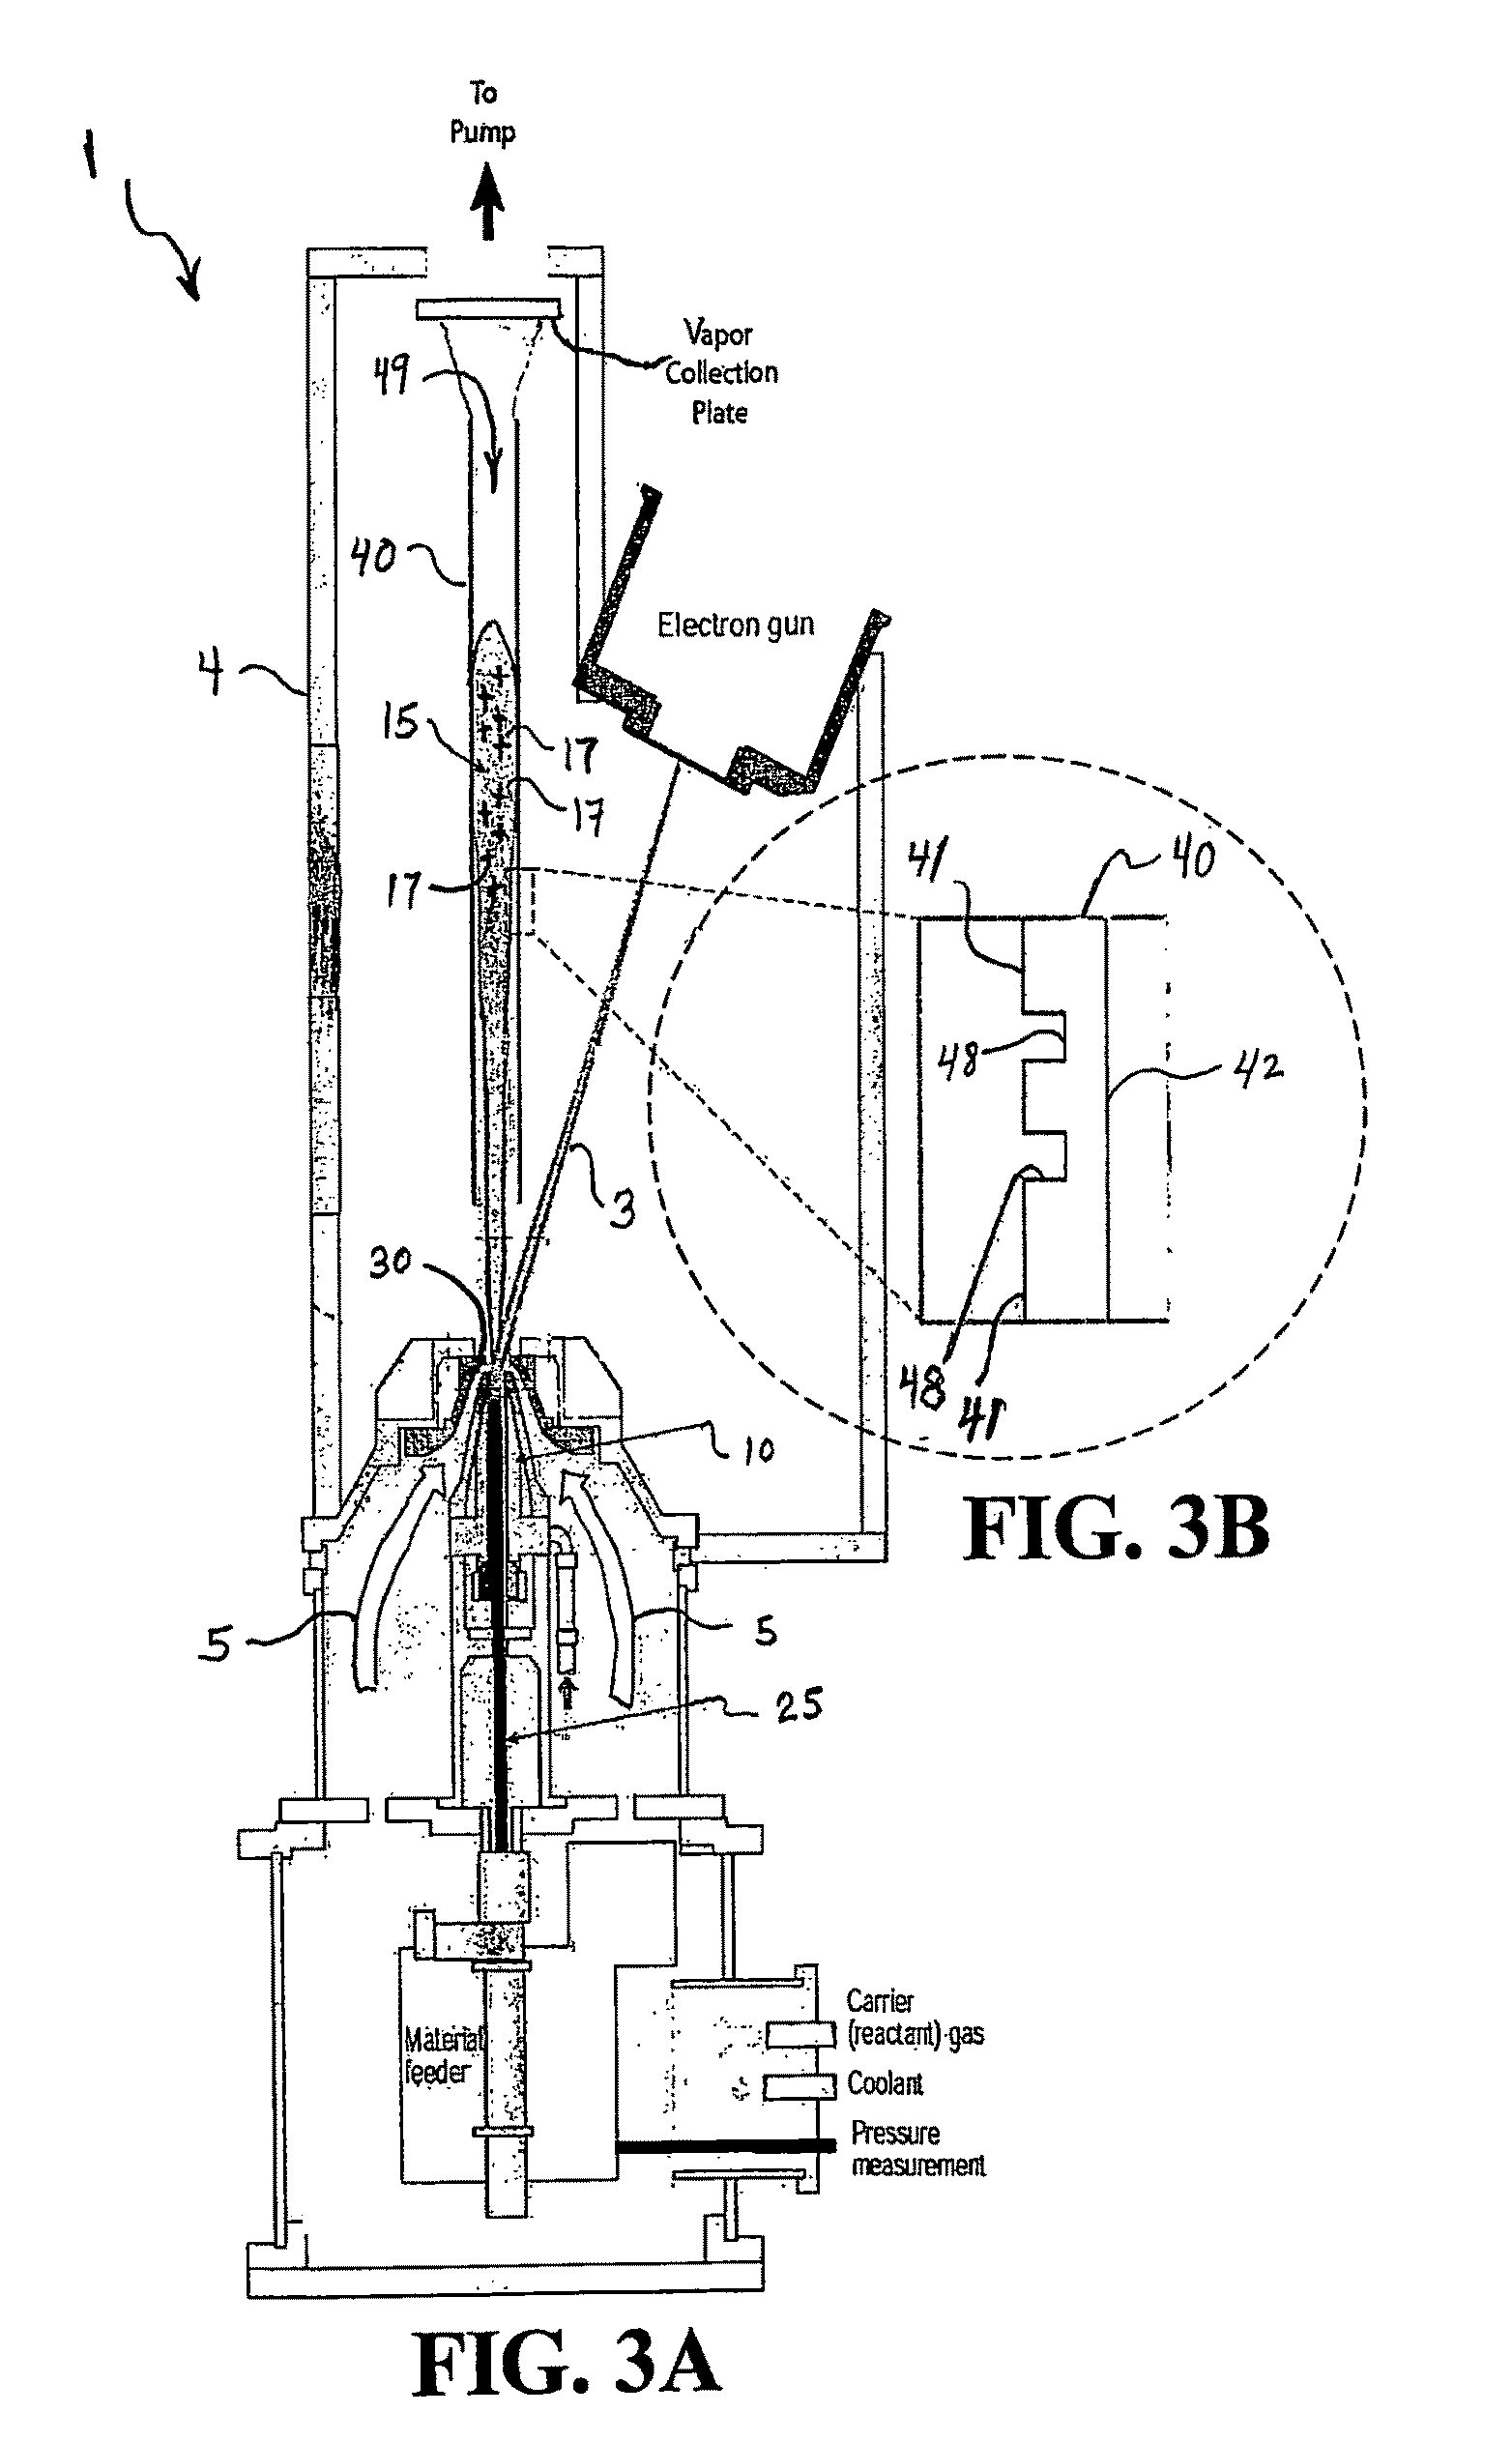 Apparatus and method for applying coatings onto the interior surfaces of components and related structures produced therefrom